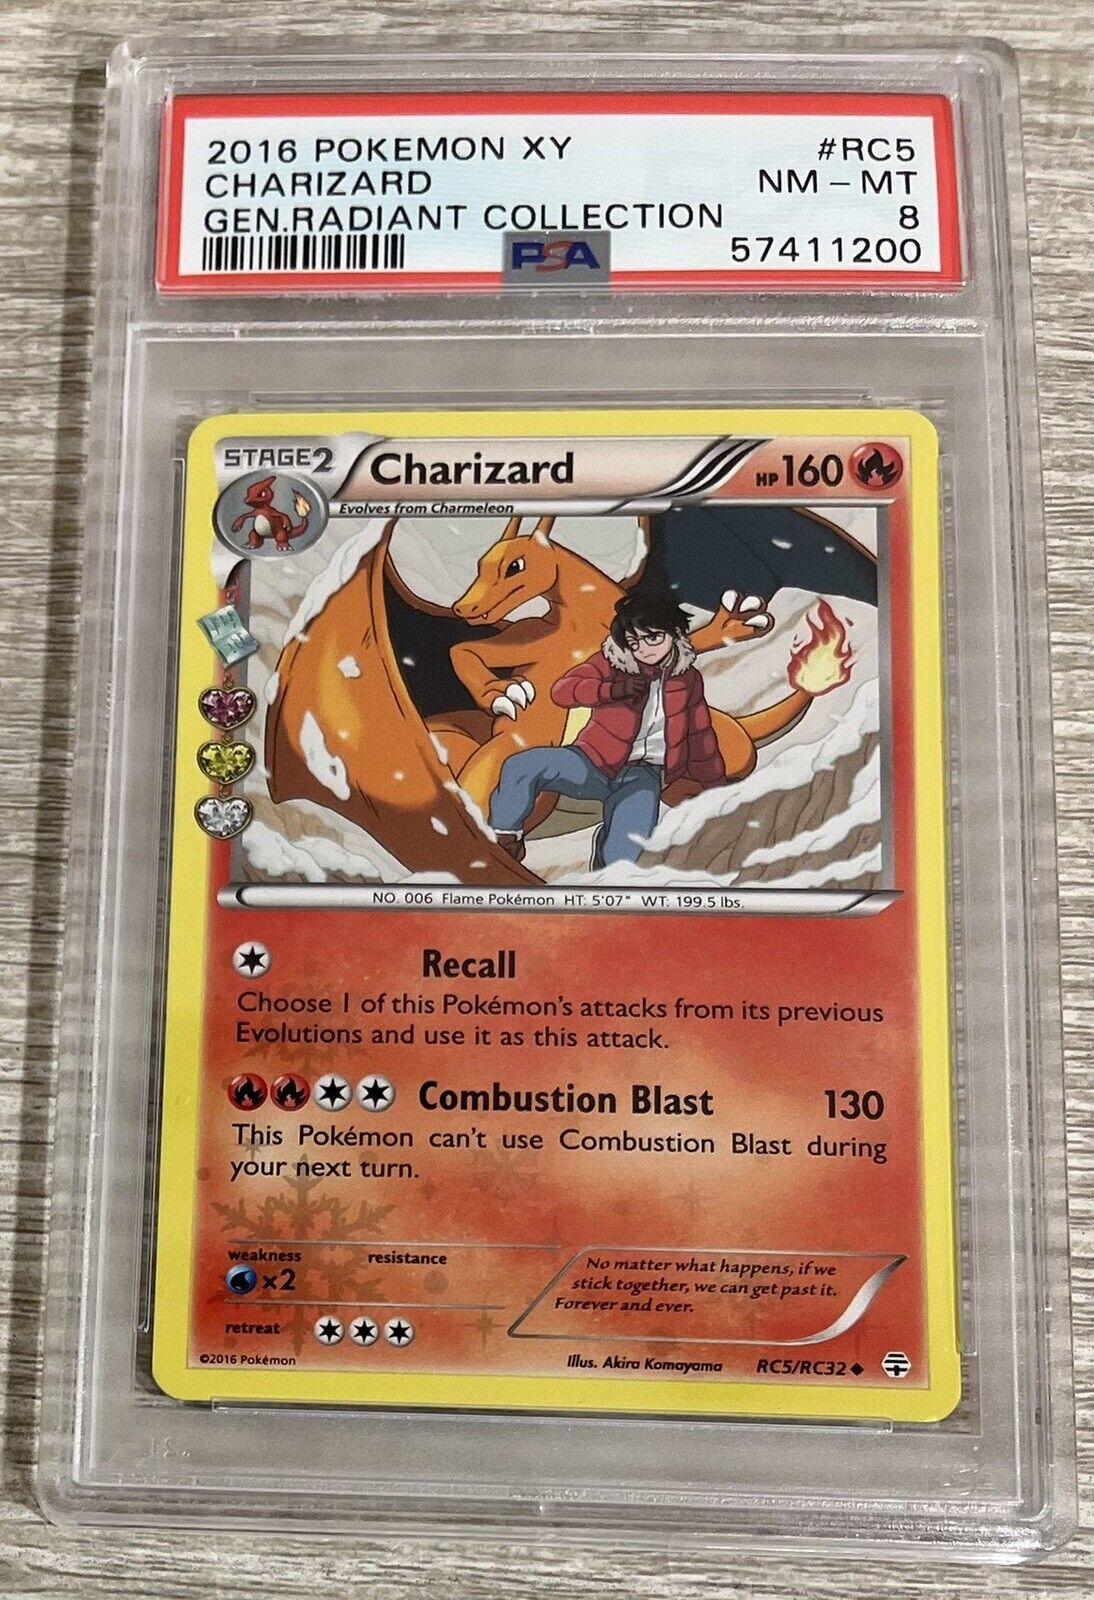 PSA 8 Charizard RC5/RC32 Holo 2016 Pokemon Generations Radiant Collection  G17B